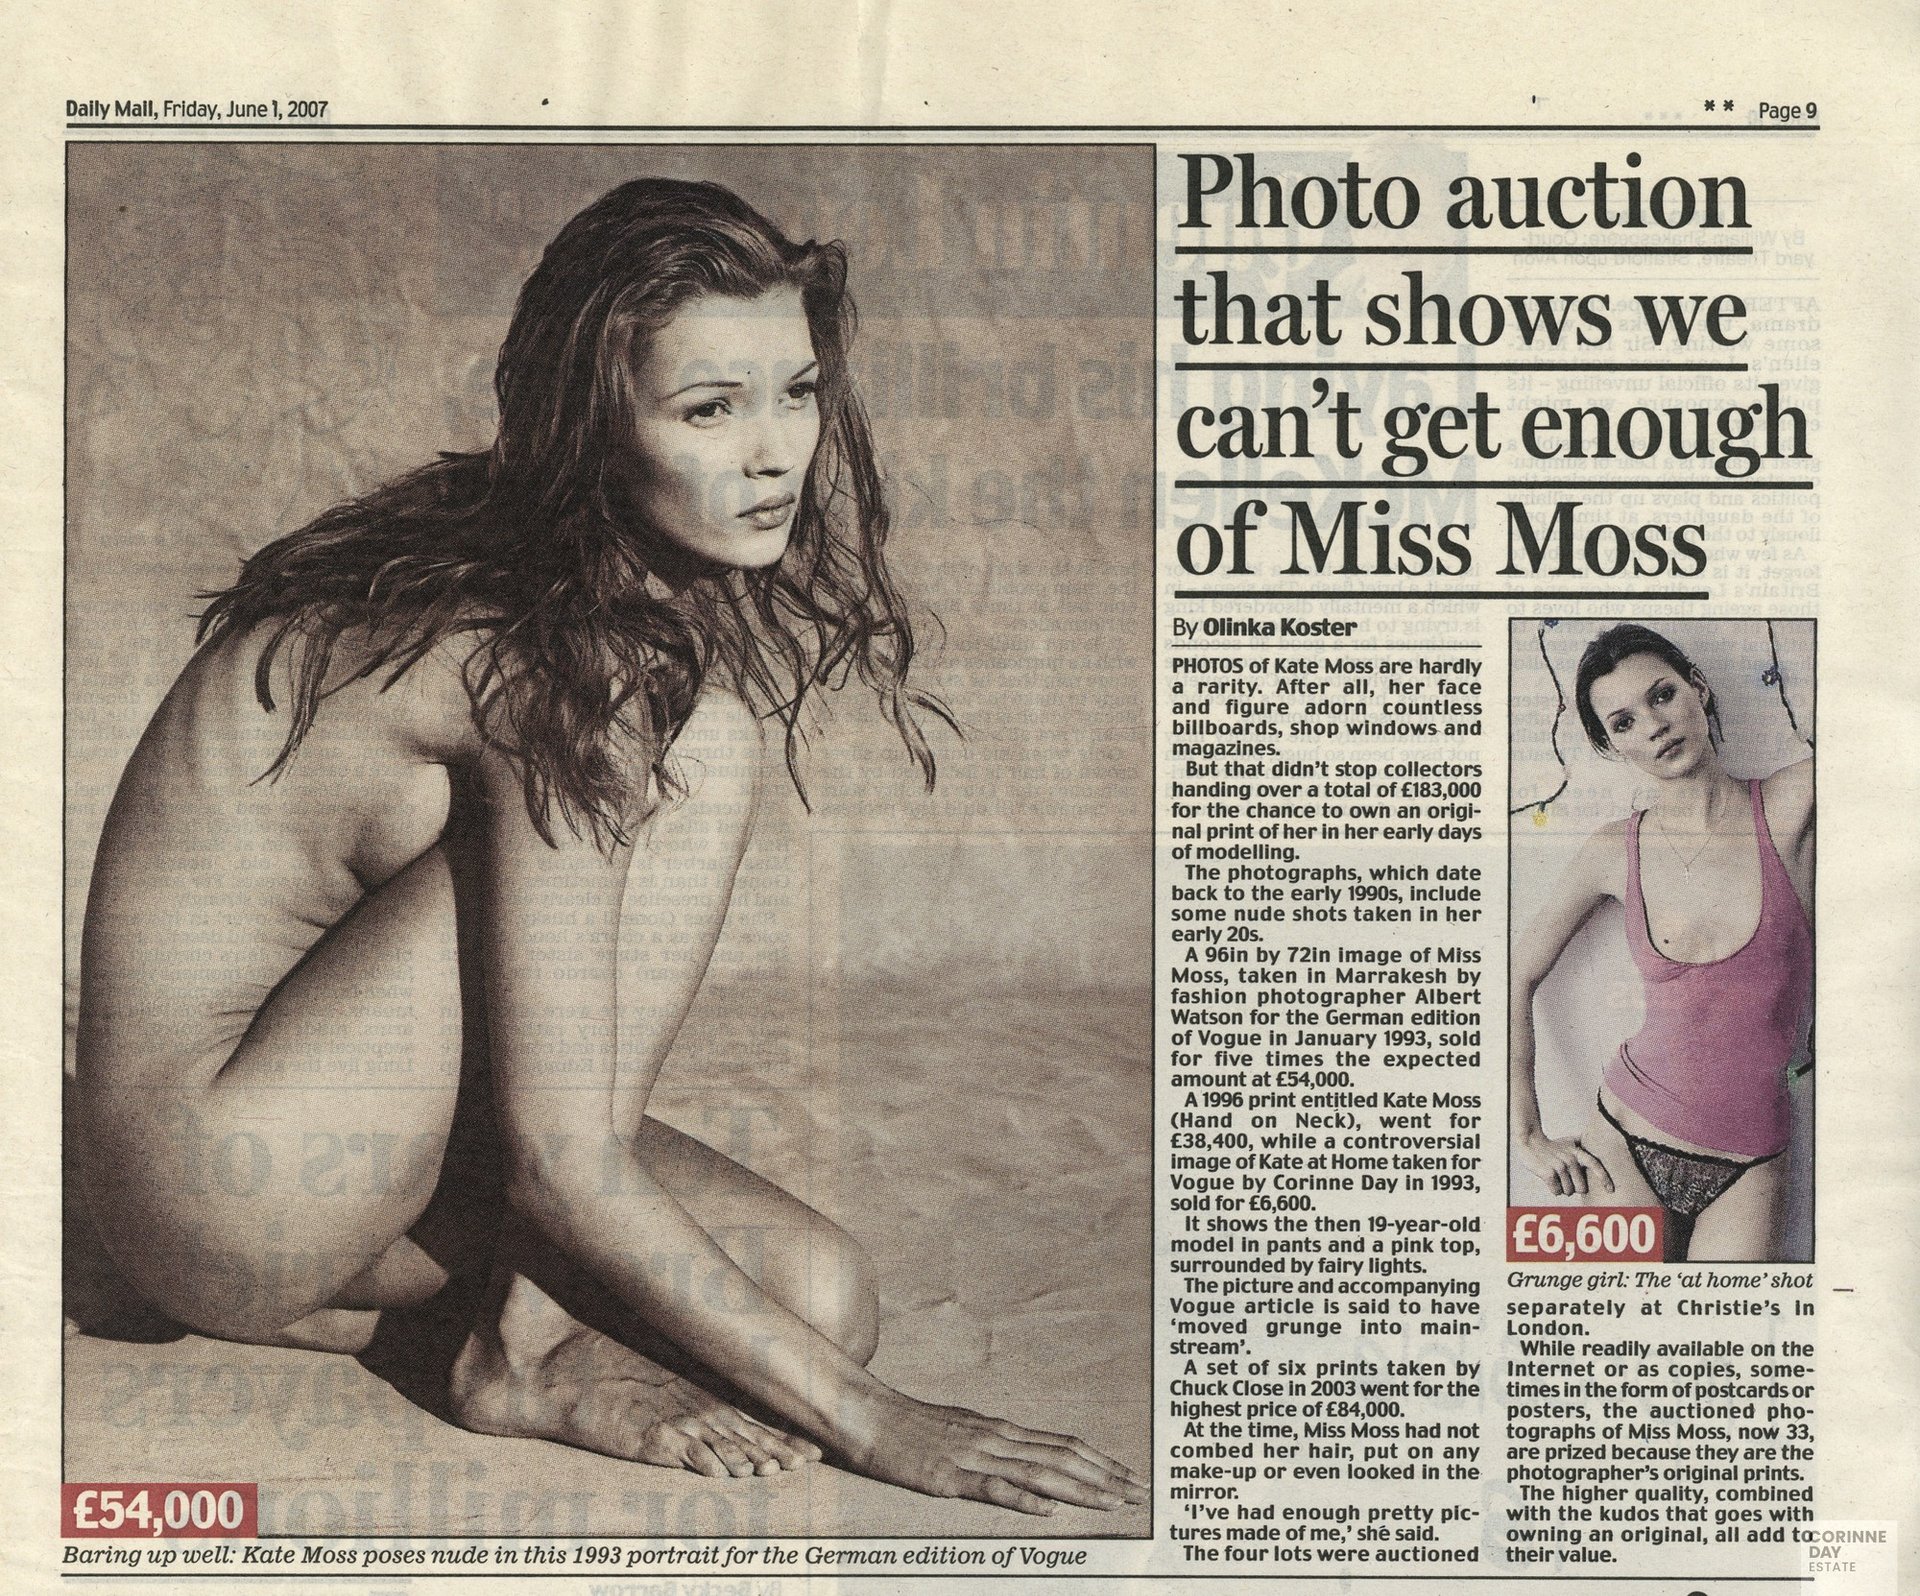 Photo auction that shows we can't get enough of Miss Moss, Daily Mail, 1 Jun 2007 — Image 1 of 1